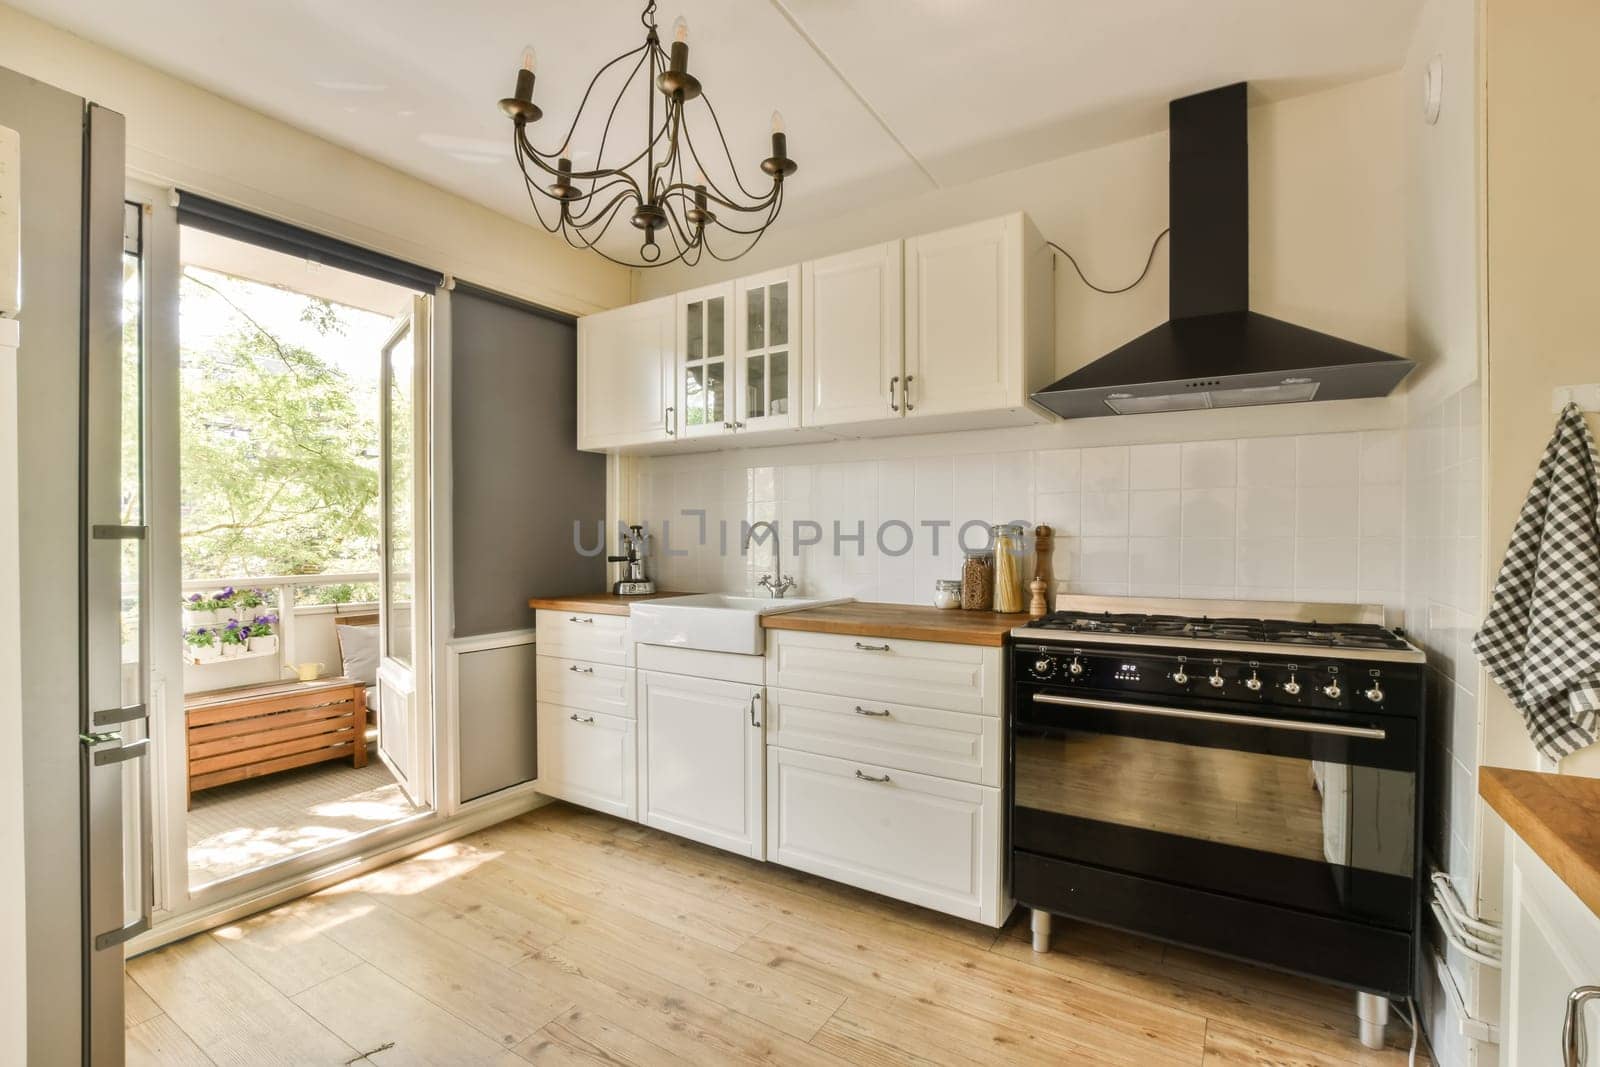 a kitchen with wood flooring and white cupboards, an oven, sink, dishwasher and stove